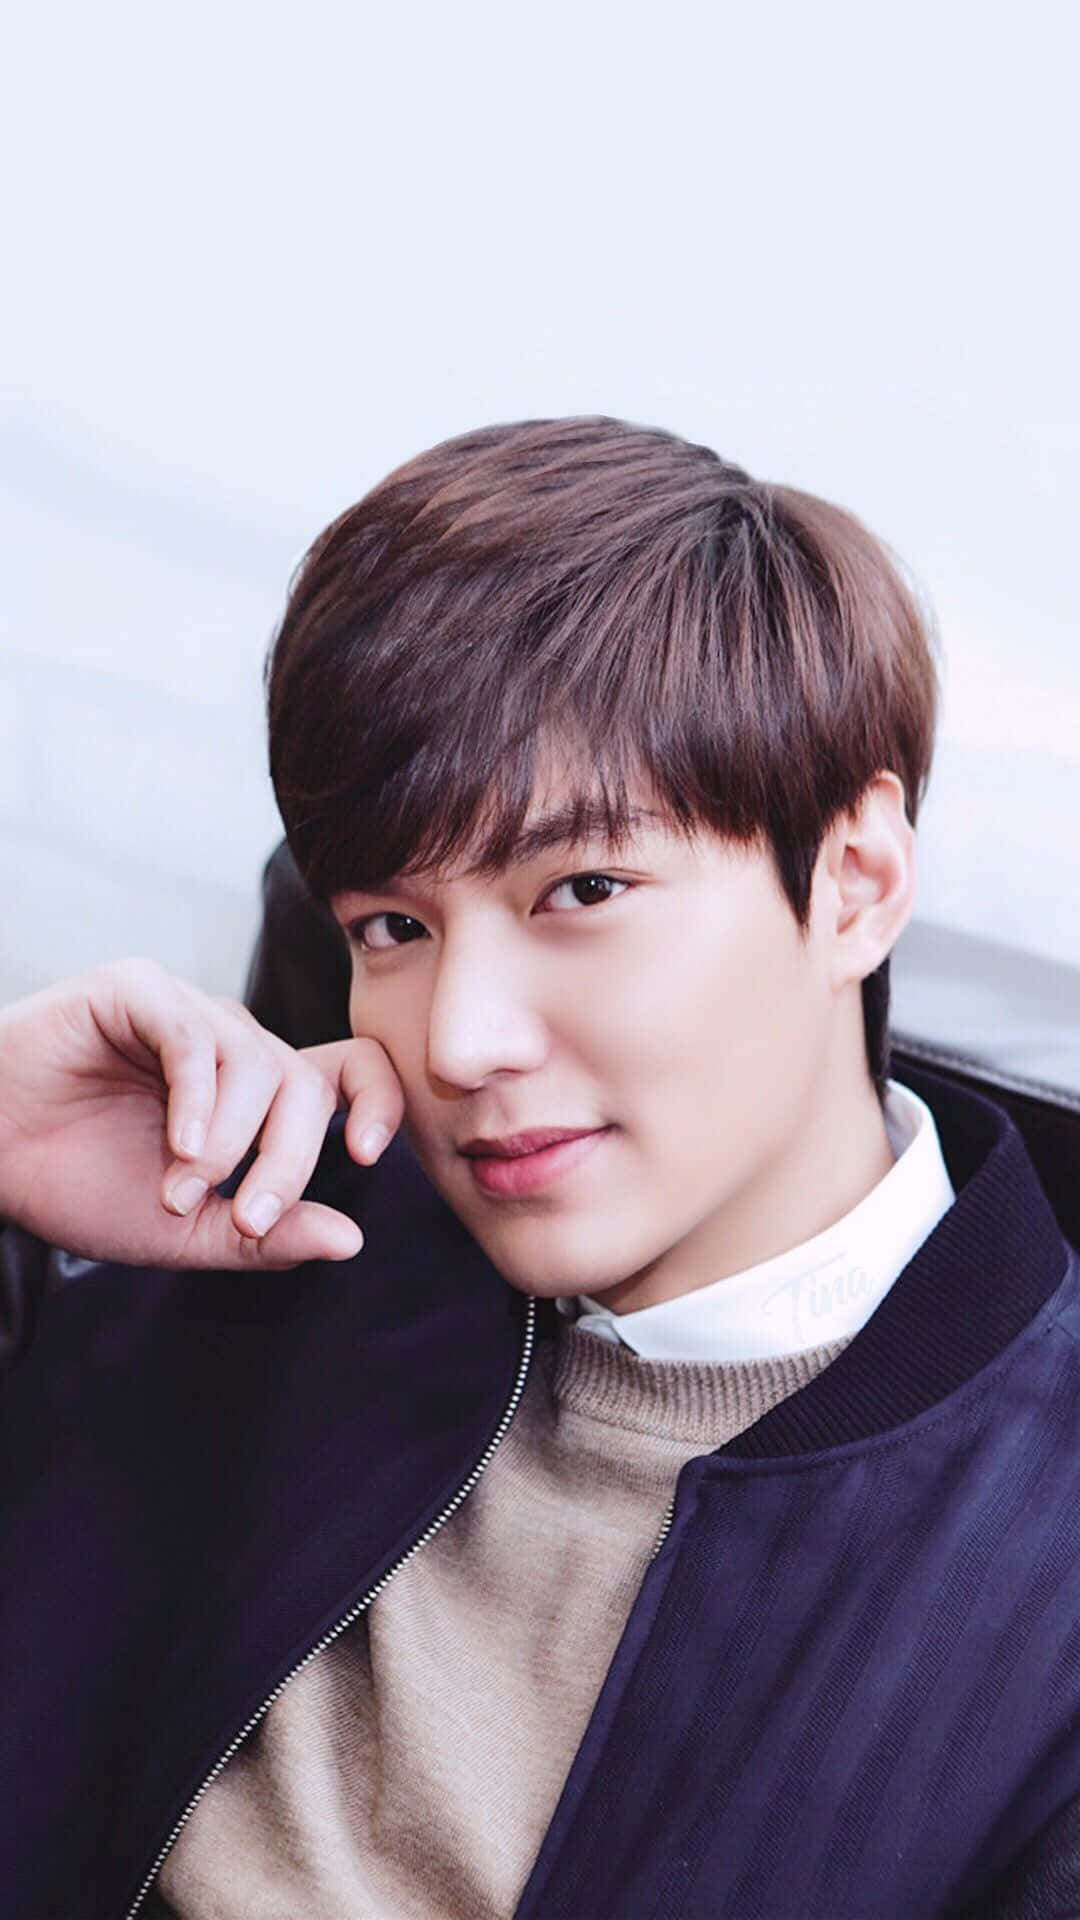 South Korean Star Lee Min Ho Majestically Posing for a Photoshoot Wallpaper